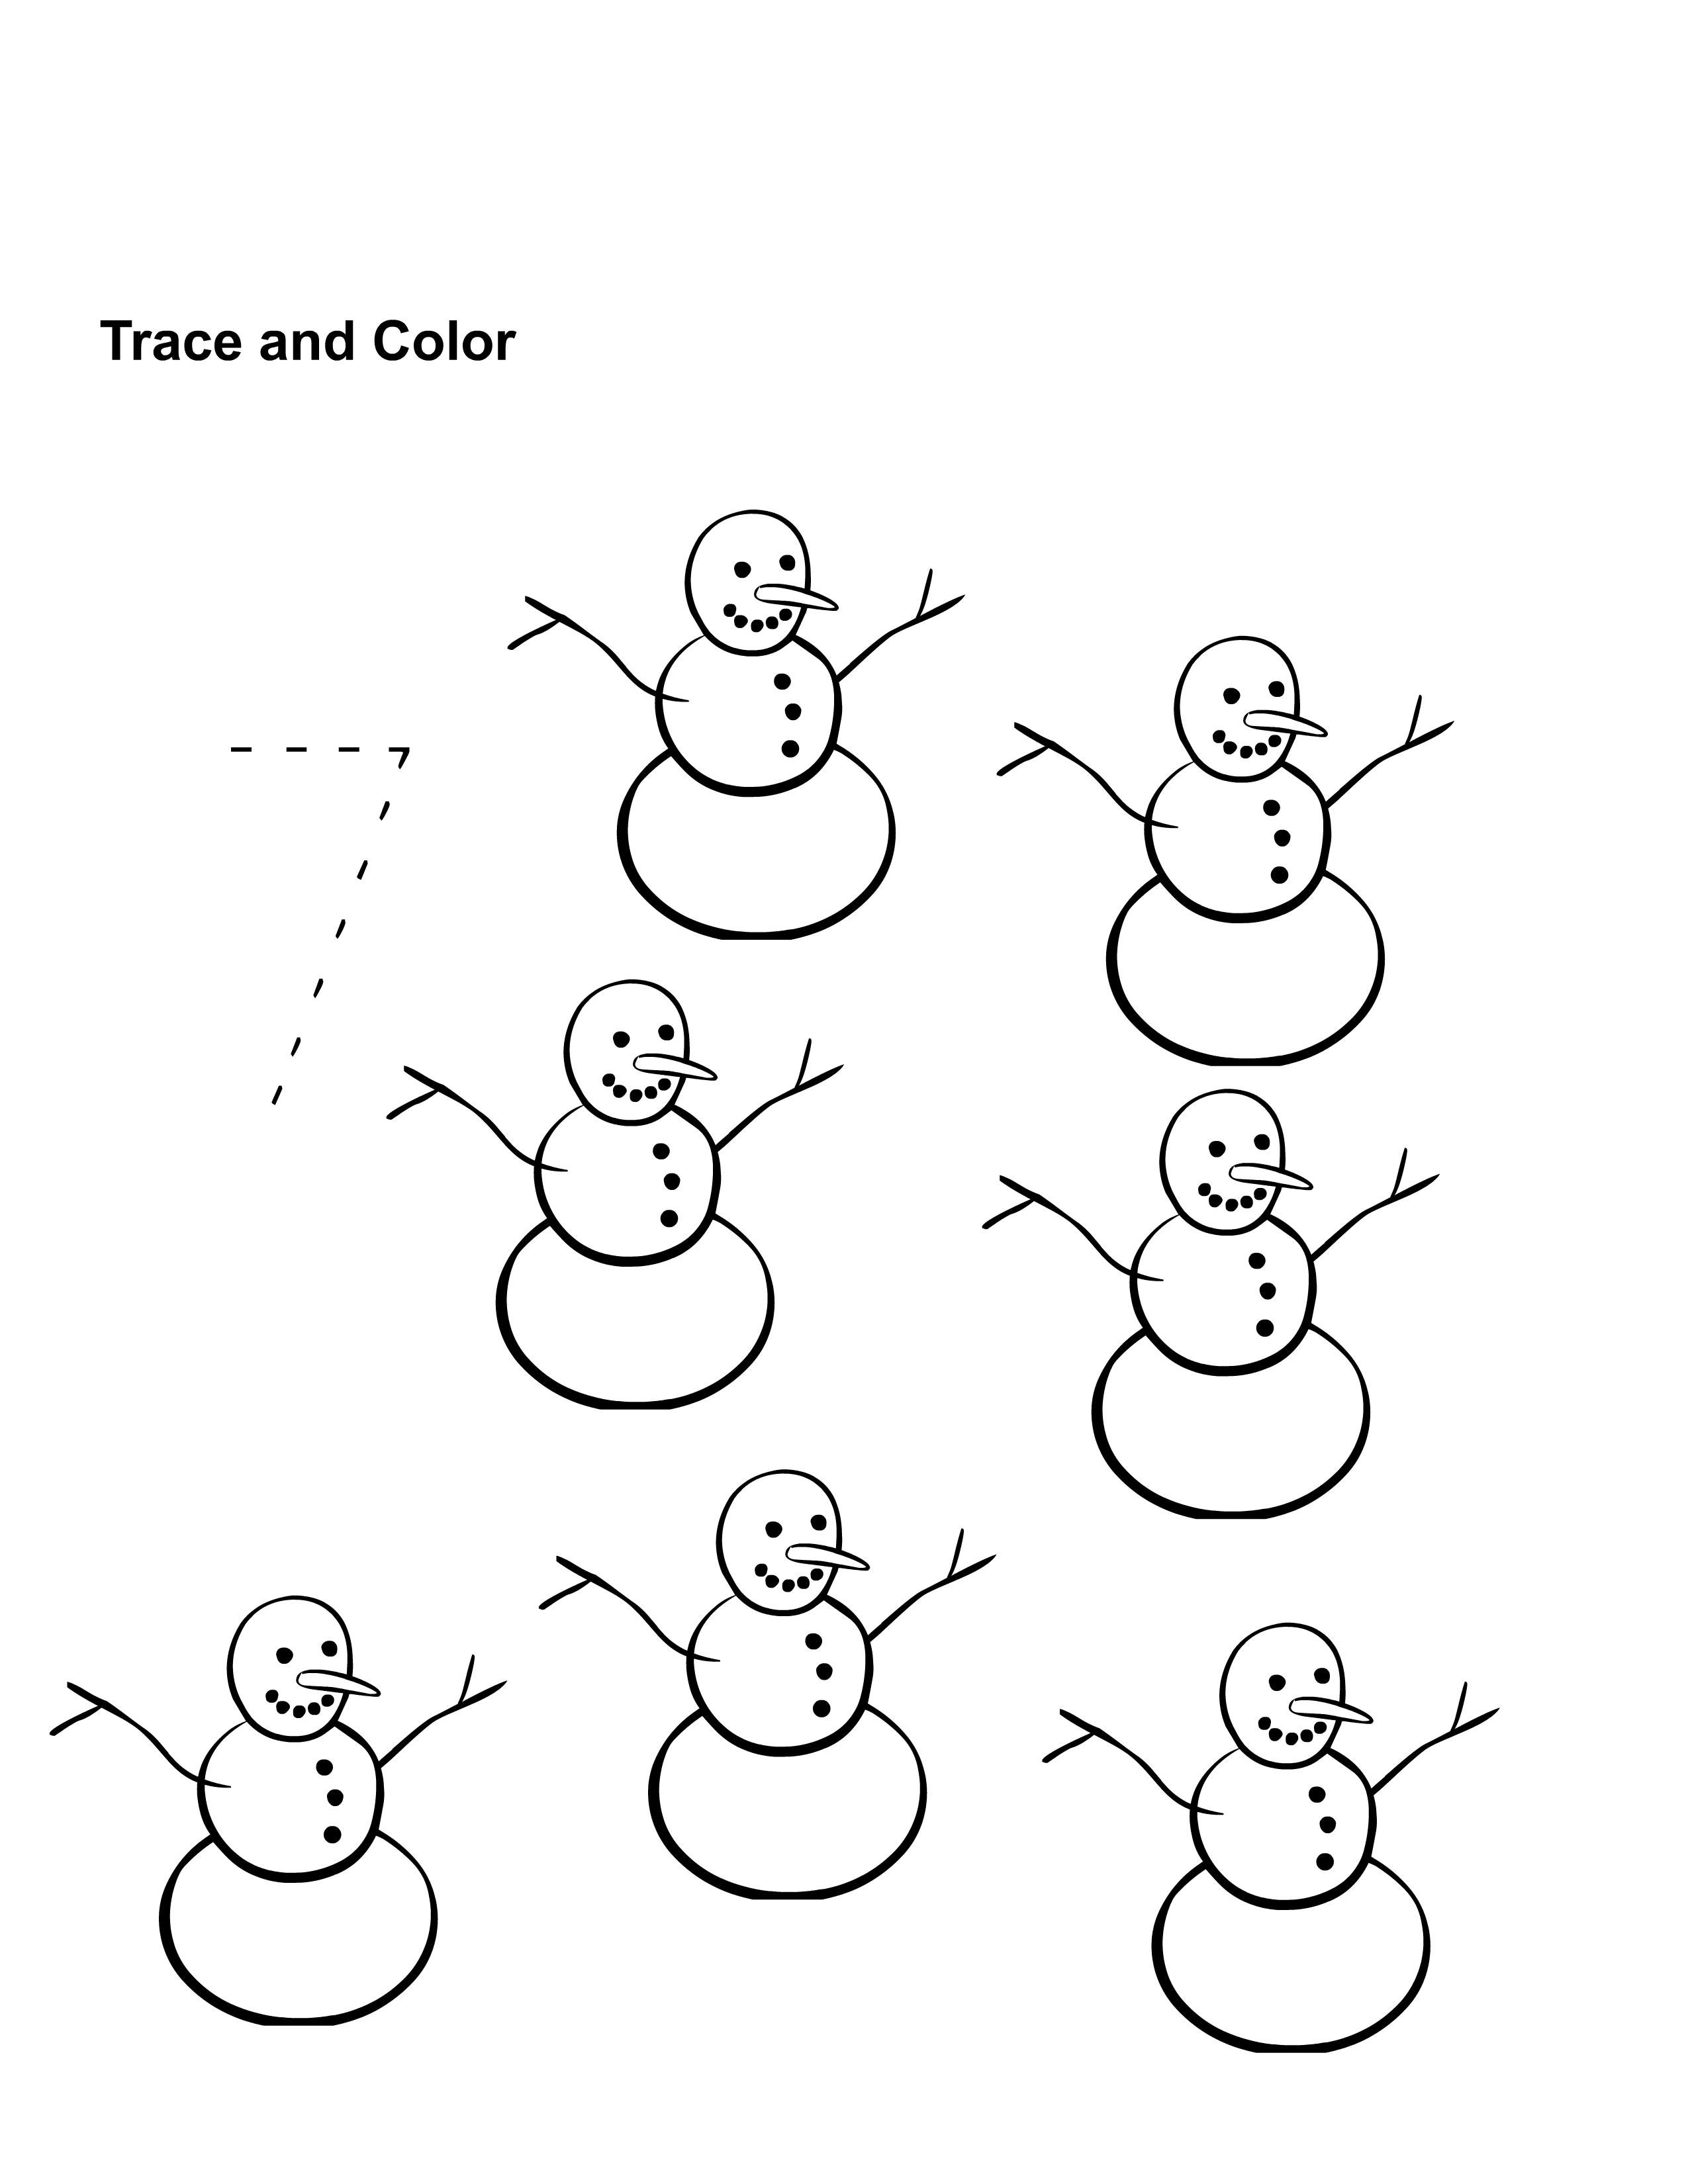 tracing-numbers-learning-printable-number-tracing-worksheets-for-kindergarten-1-10-ten